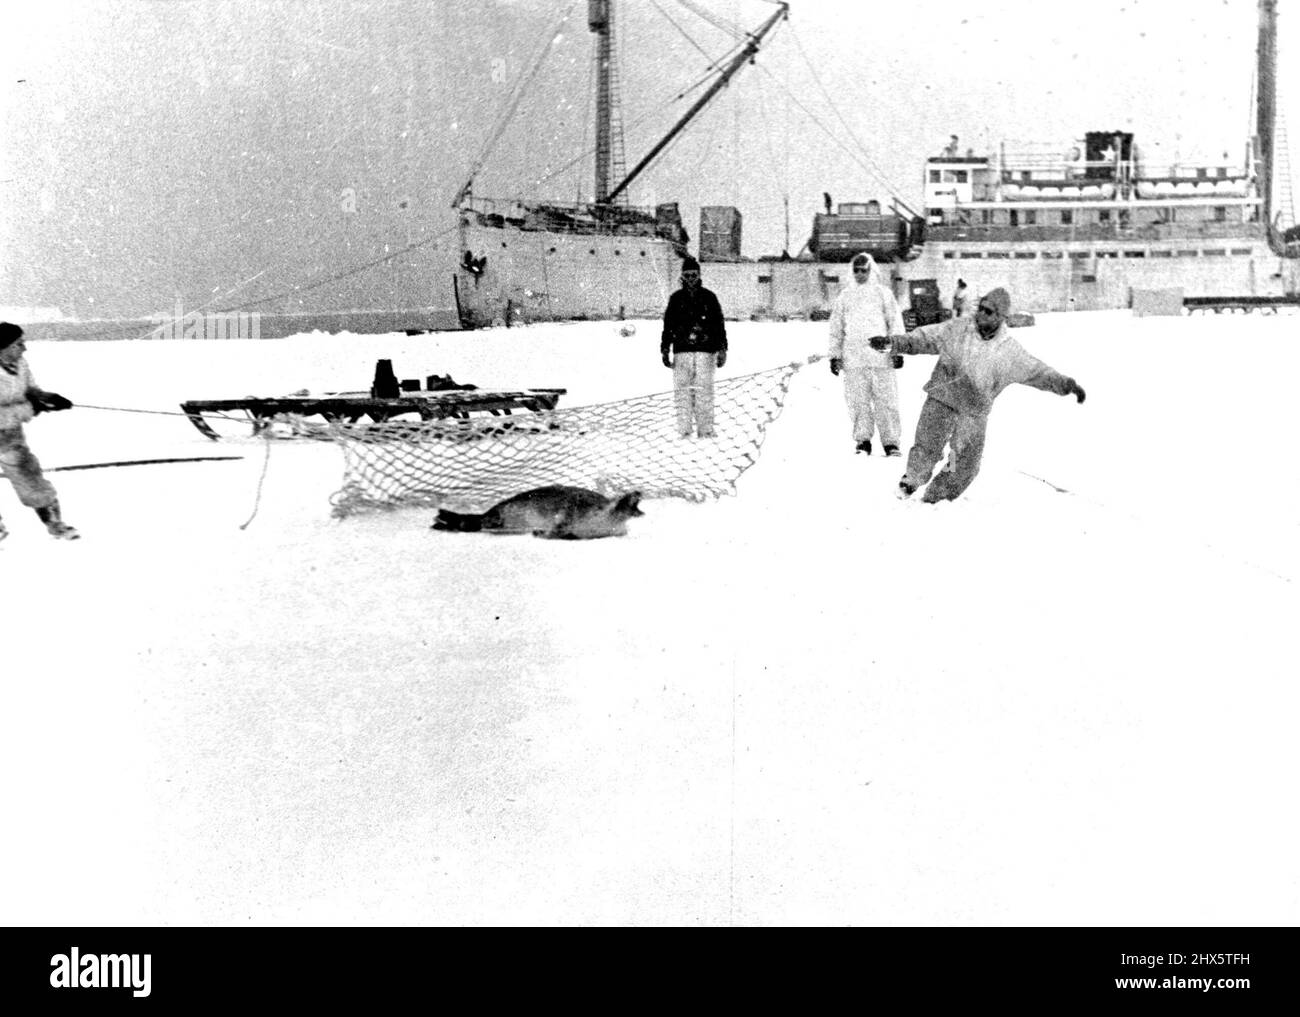 Explorers Net Seal - Members of the Byrd Antarctic expedition are shown at their base in little America as they maneuvered a, fishing net around an obstreperous seal. After considerable work, the animal was trapped. Seamen sometimes use them for food but this one may be destined for an American zoo. March 12, 1940. (Photo by Associated Press Paramount News Photo). Stock Photo